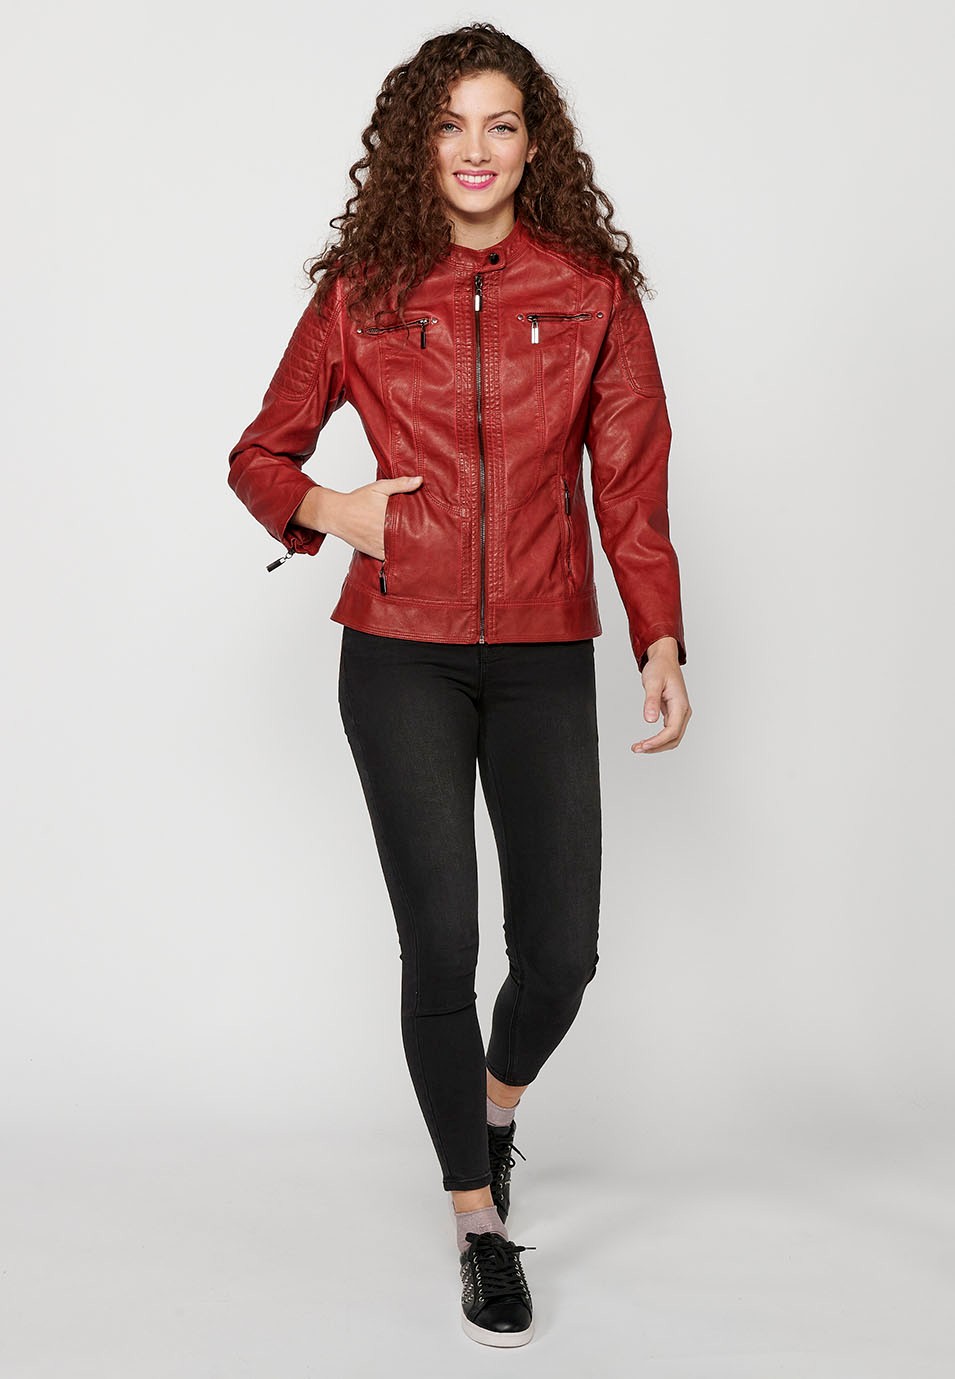 Women's Red Long Sleeve Round Neck Zipper Front Closure Jacket 4